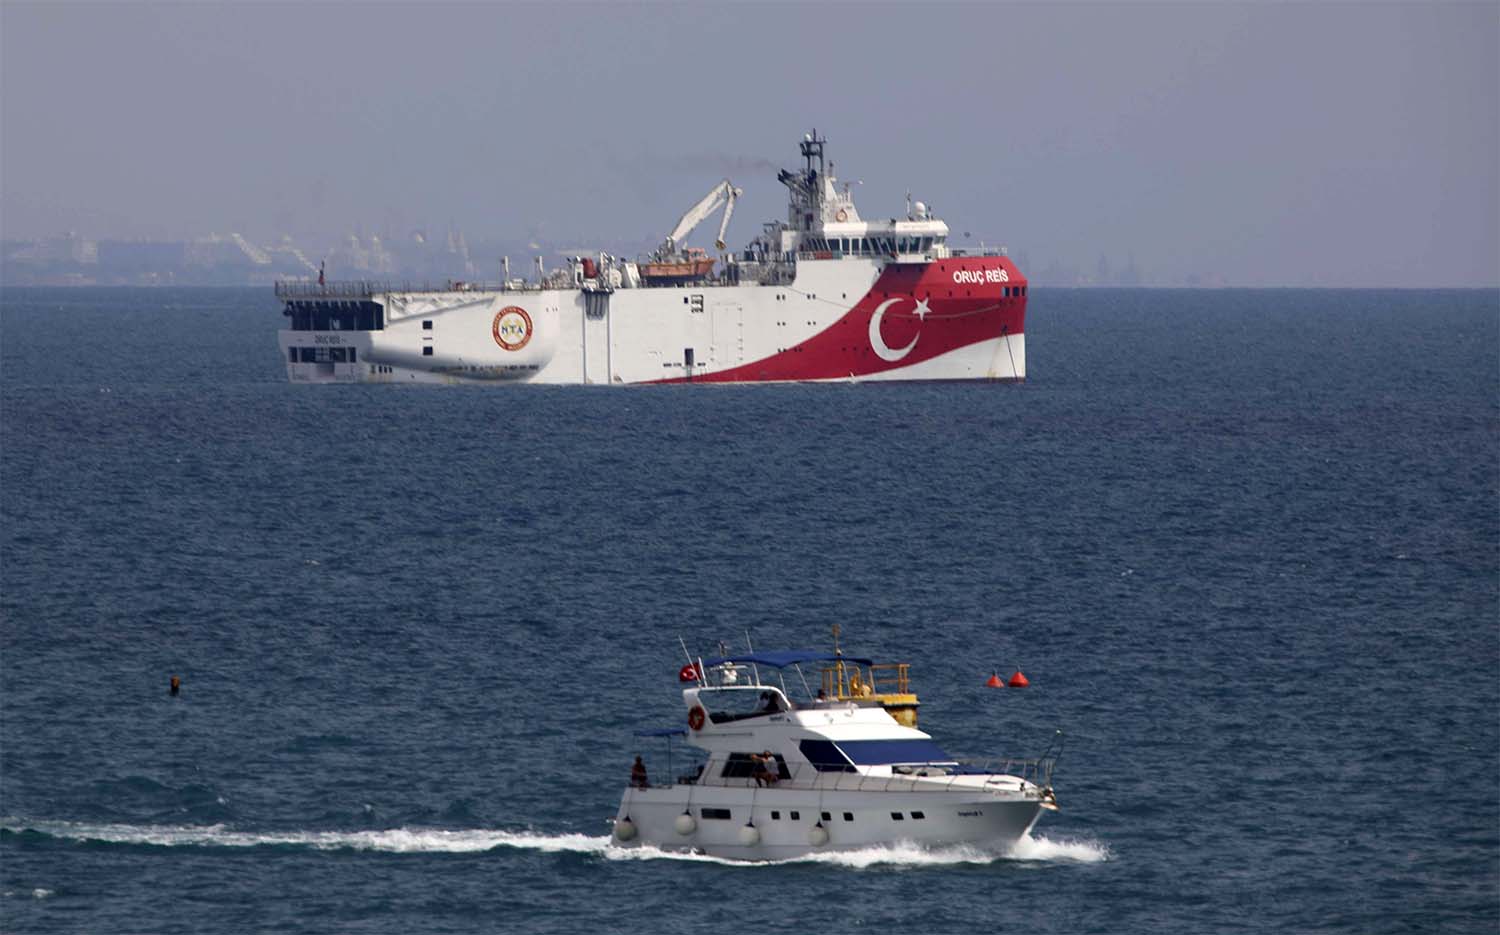 Turkey put its gas exploration ship back to sea straight after EU's October summit